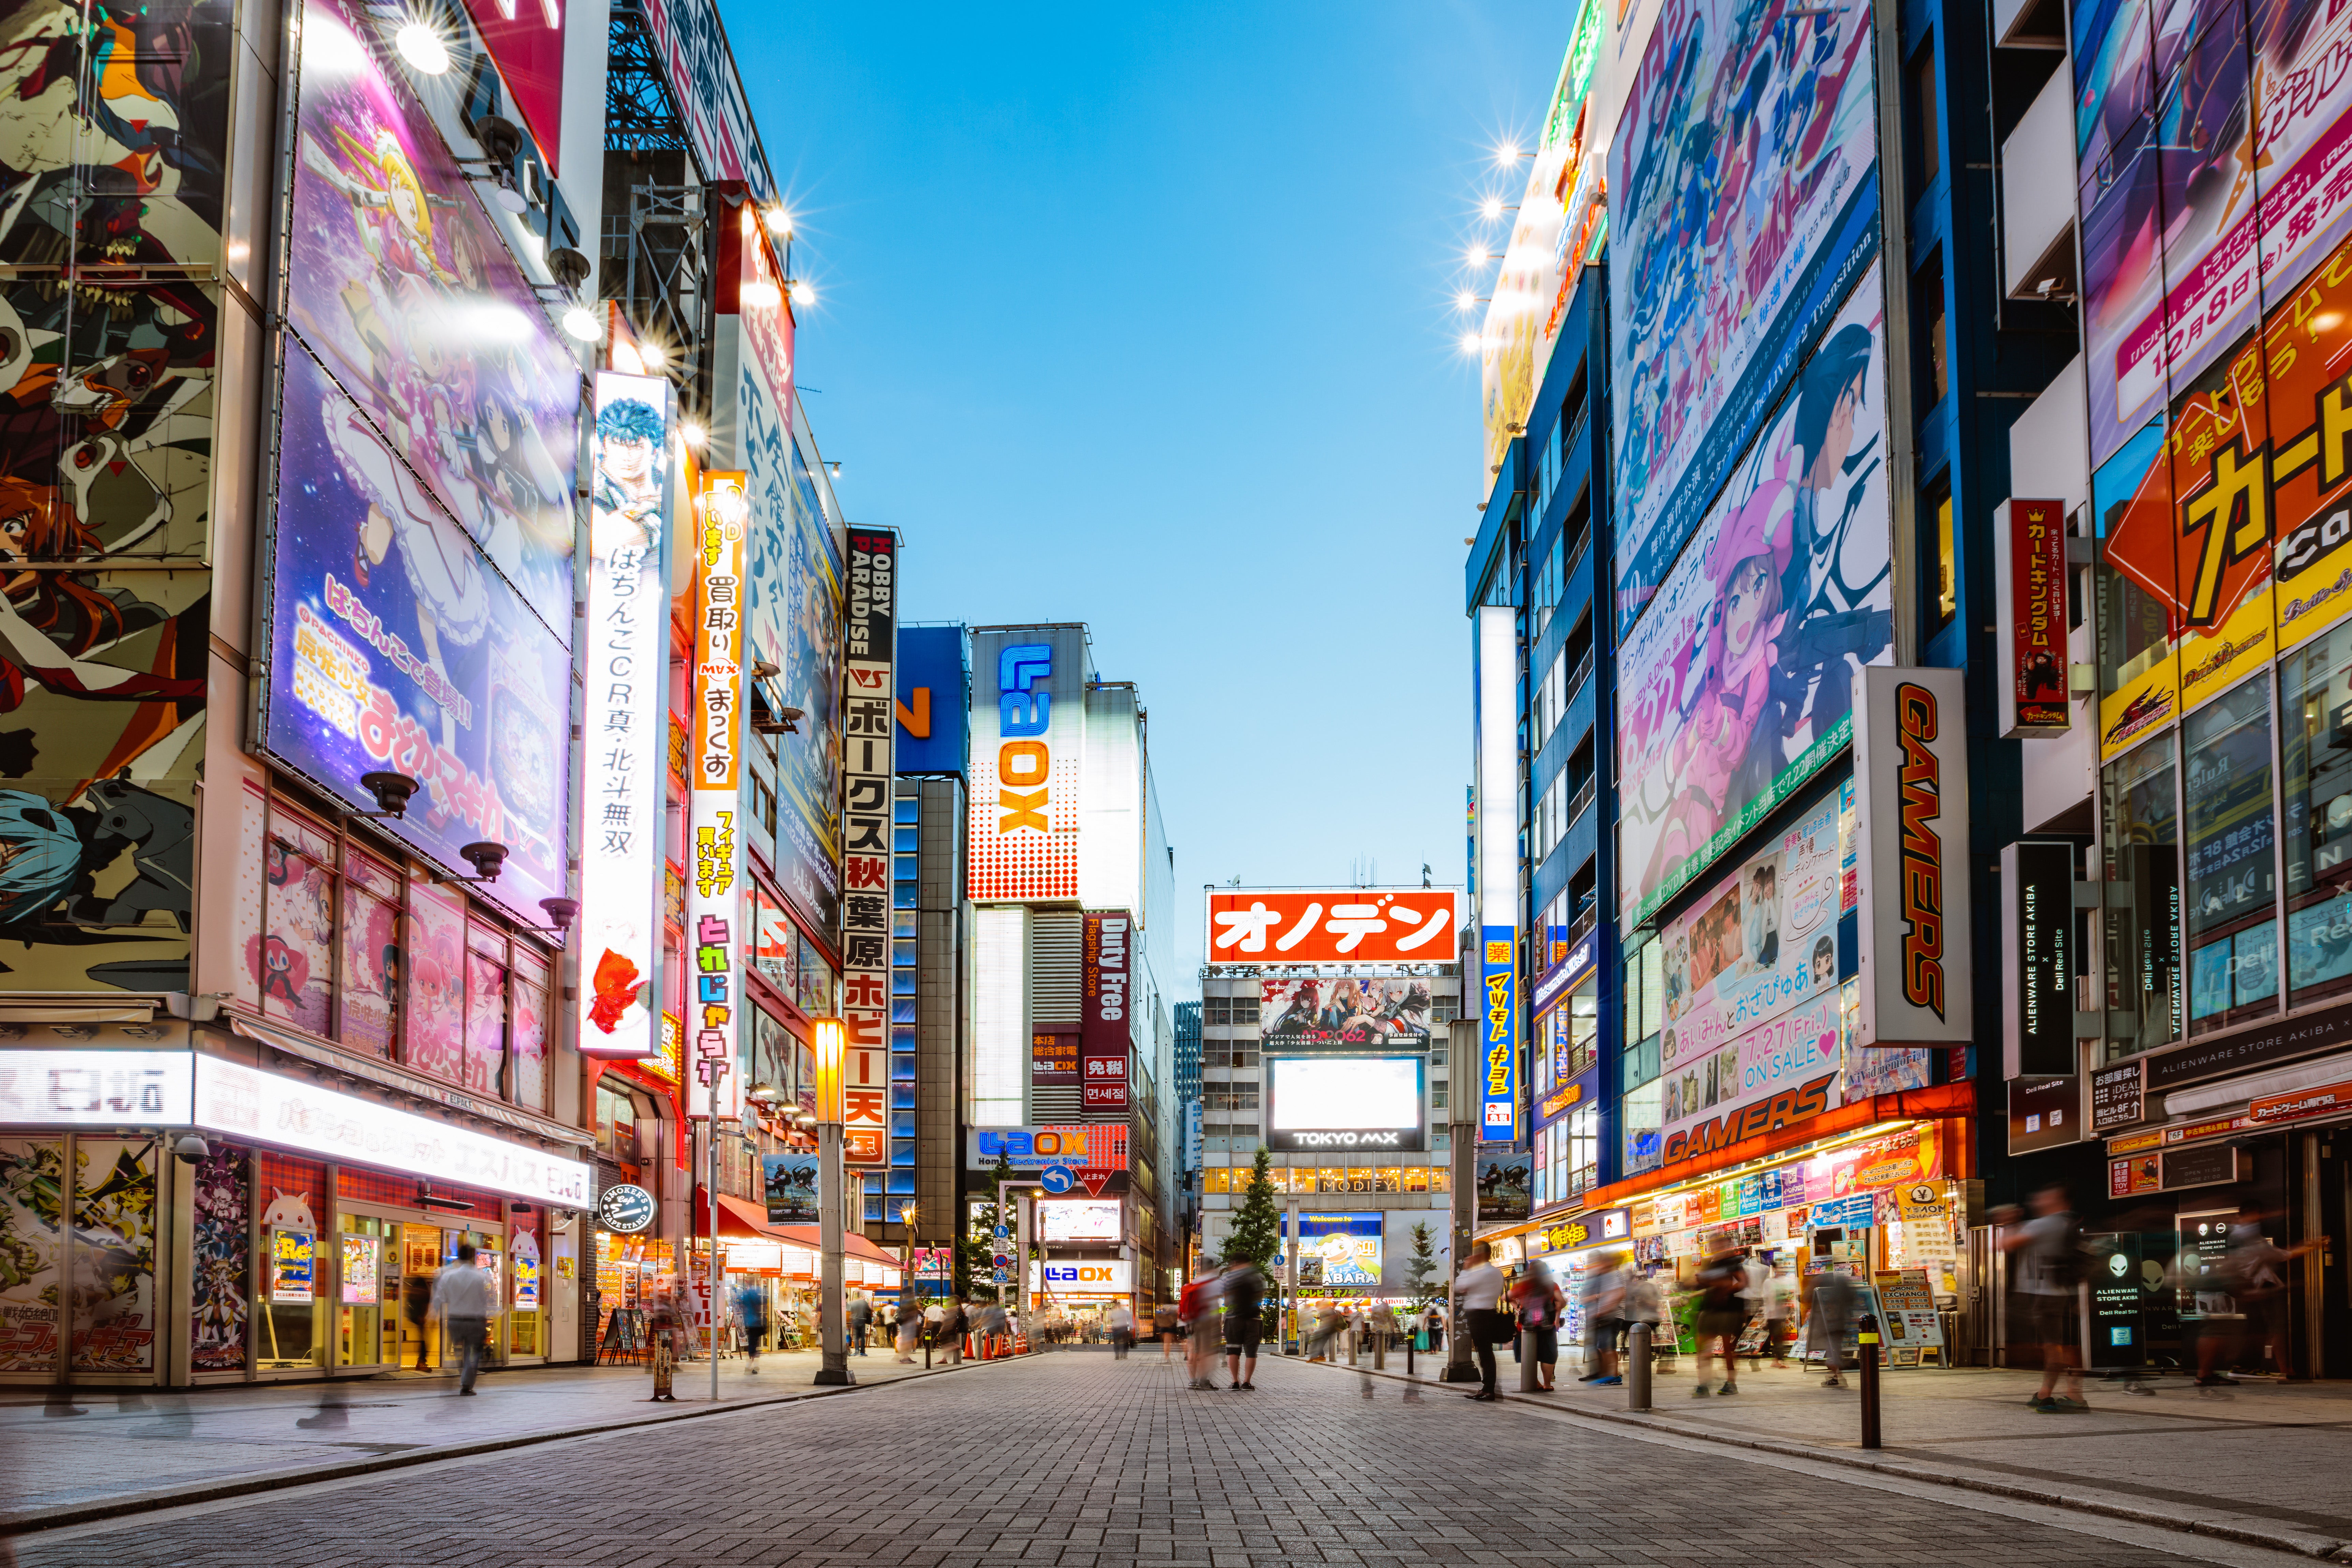 Tokyo Travel Guide: Everything to See, Eat, and Do on Your Trip - Thrillist